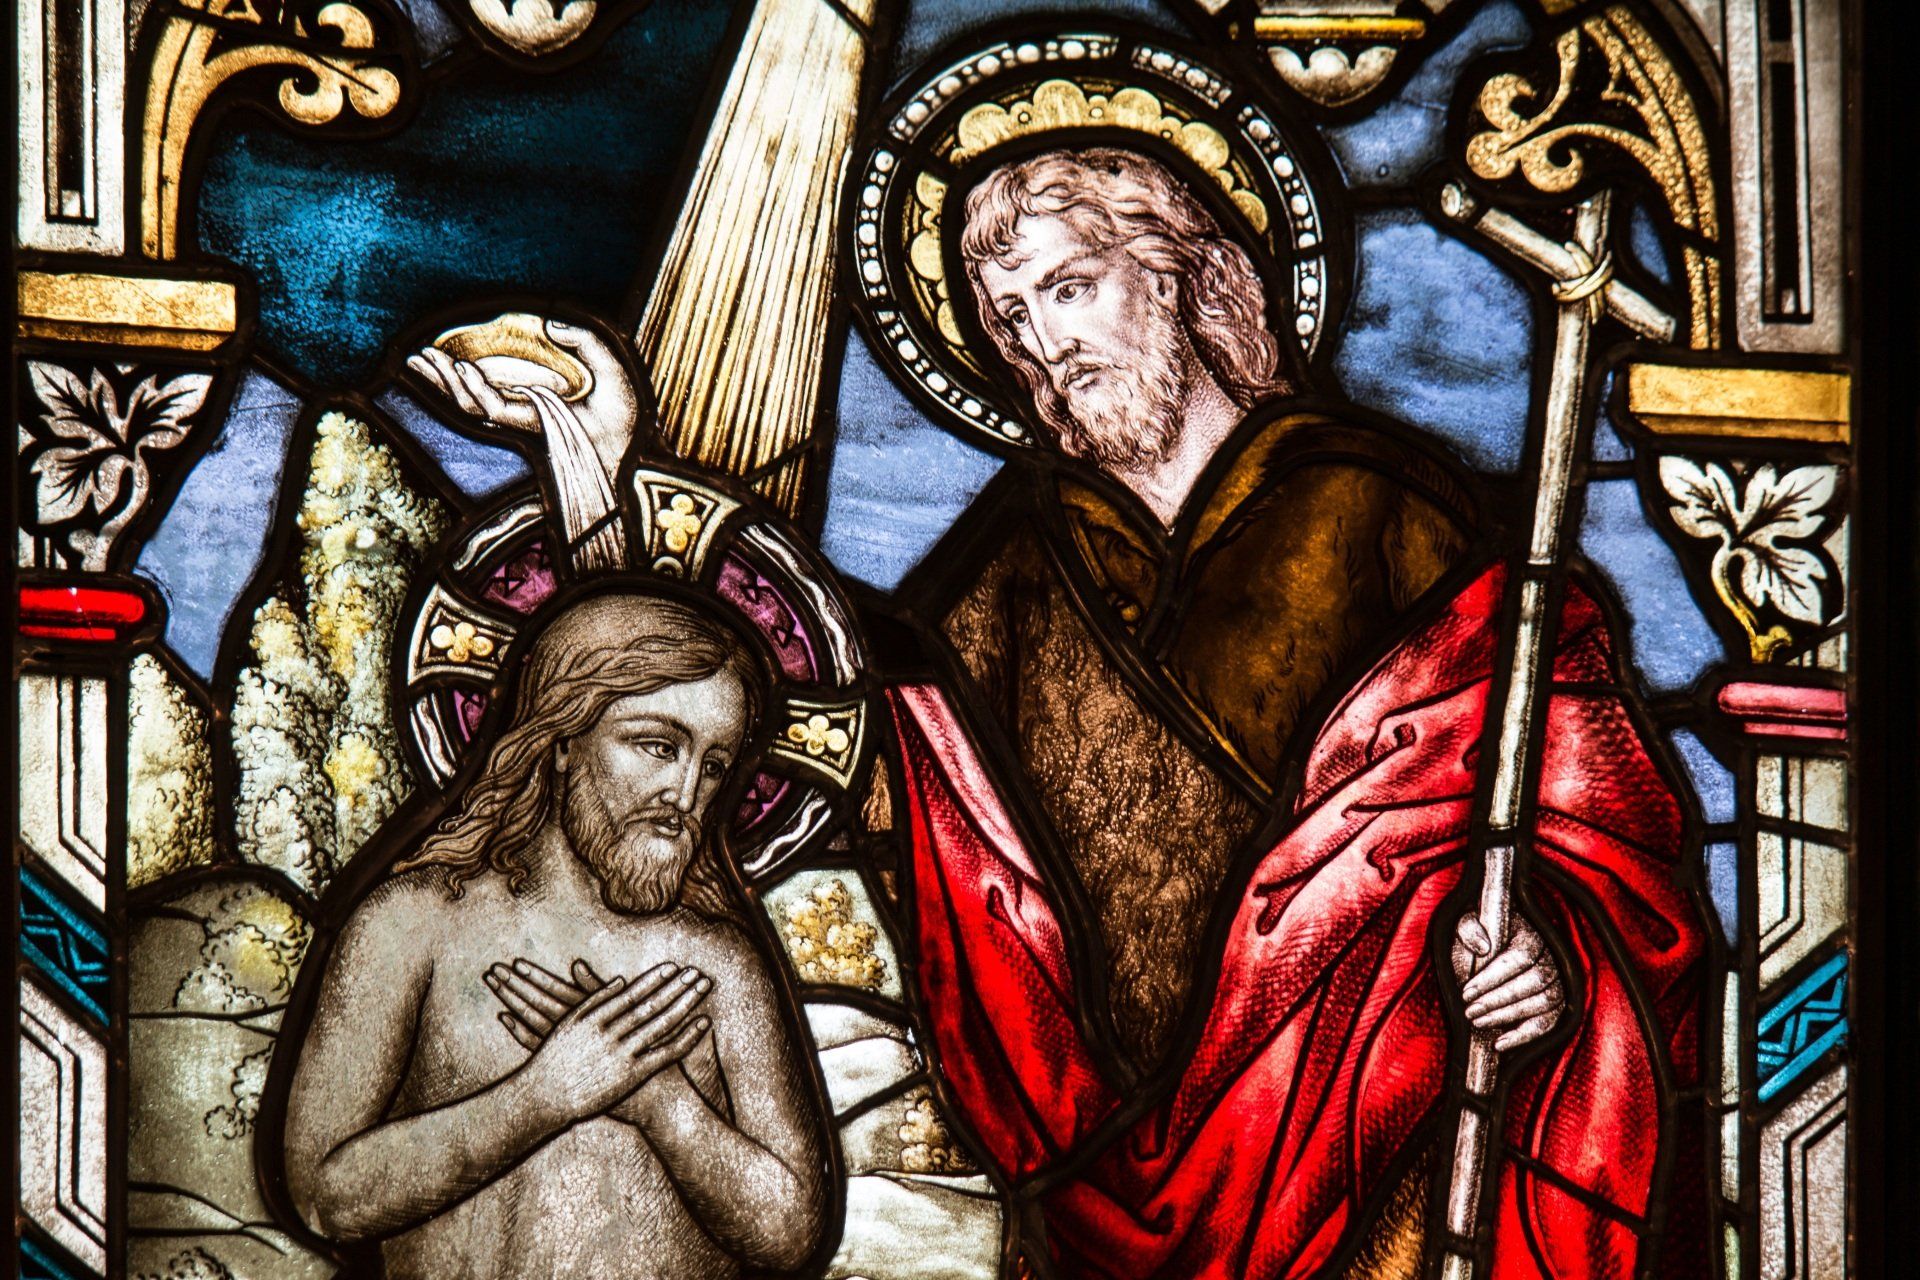 Church Window - Baptism of the Lord